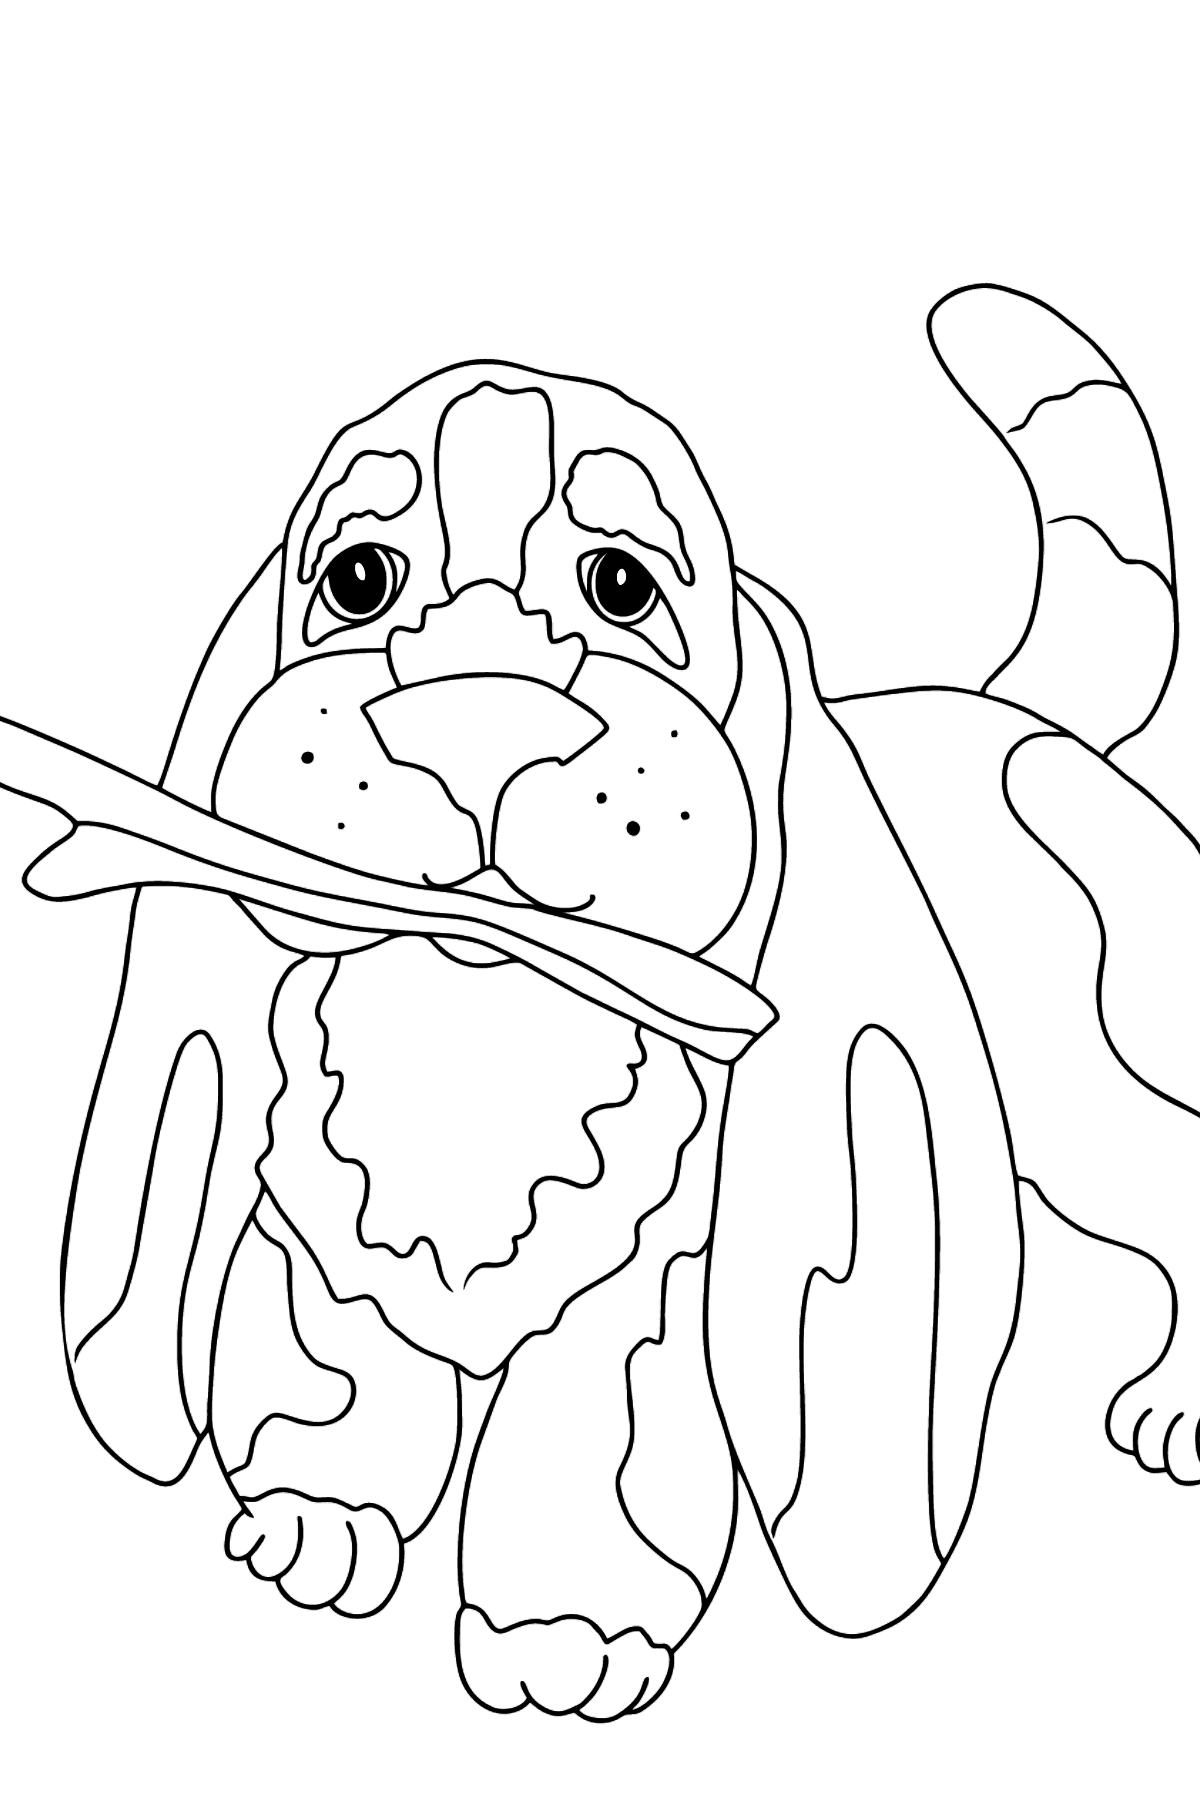 Coloring Page - A Dog is Waiting for Its Owner with a Stick - Coloring Pages for Kids